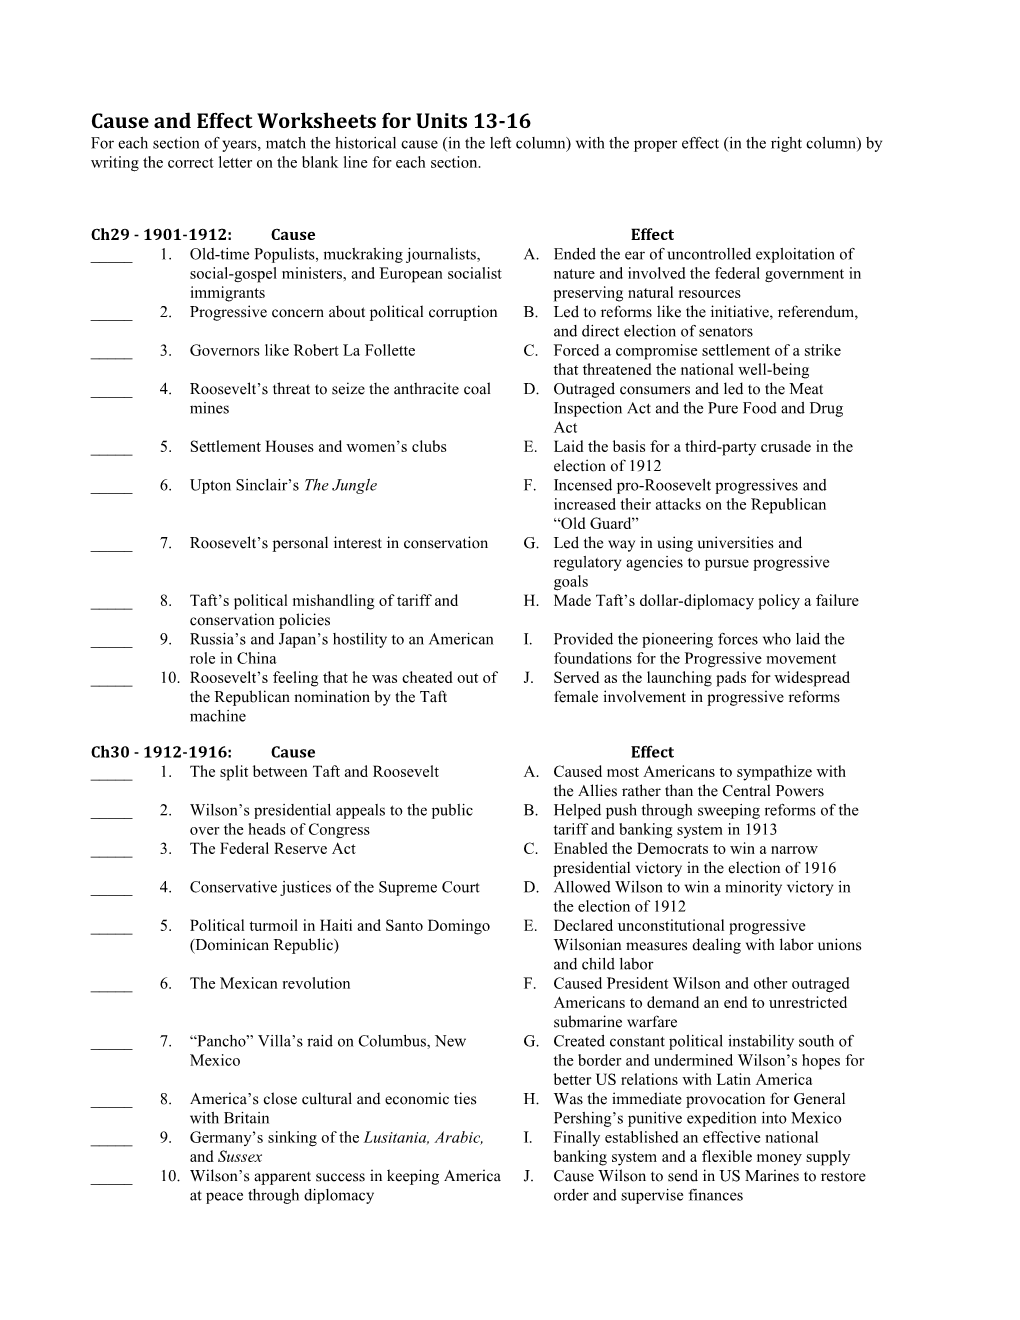 Cause and Effect Worksheets for Units 13-16